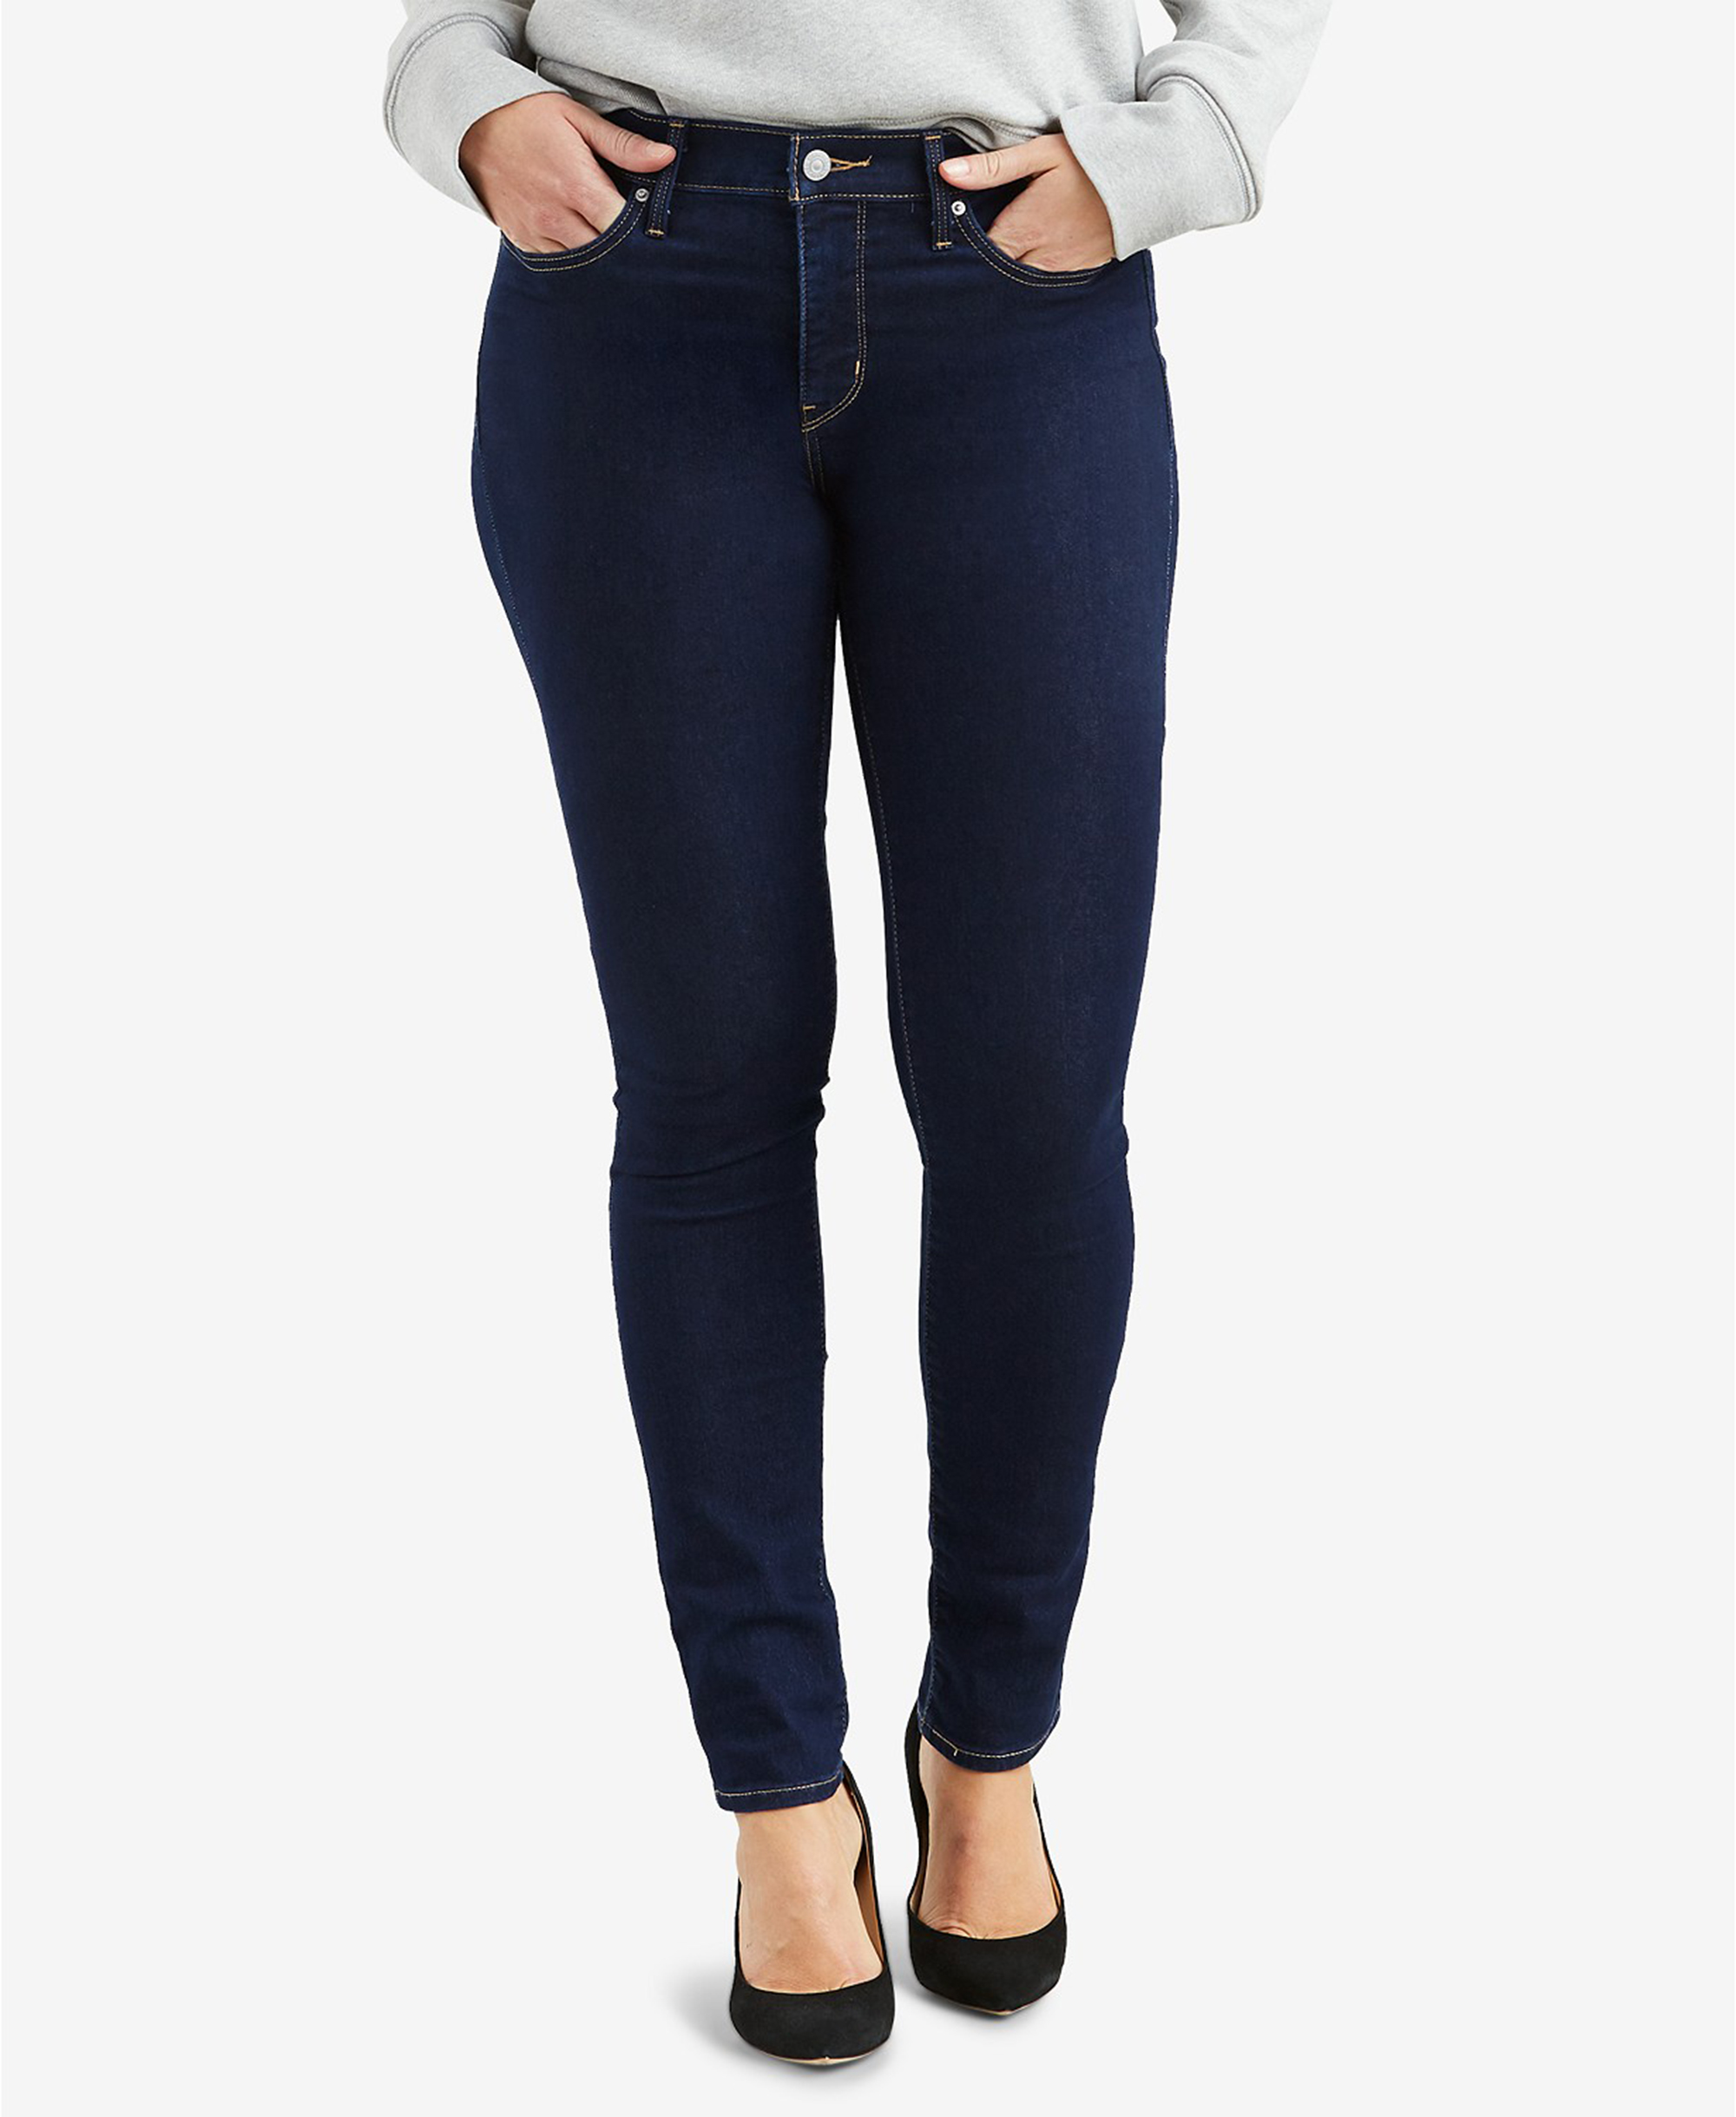 Get the Shaping Jeans Everyone Loves on Sale at Macy's for Labor Day